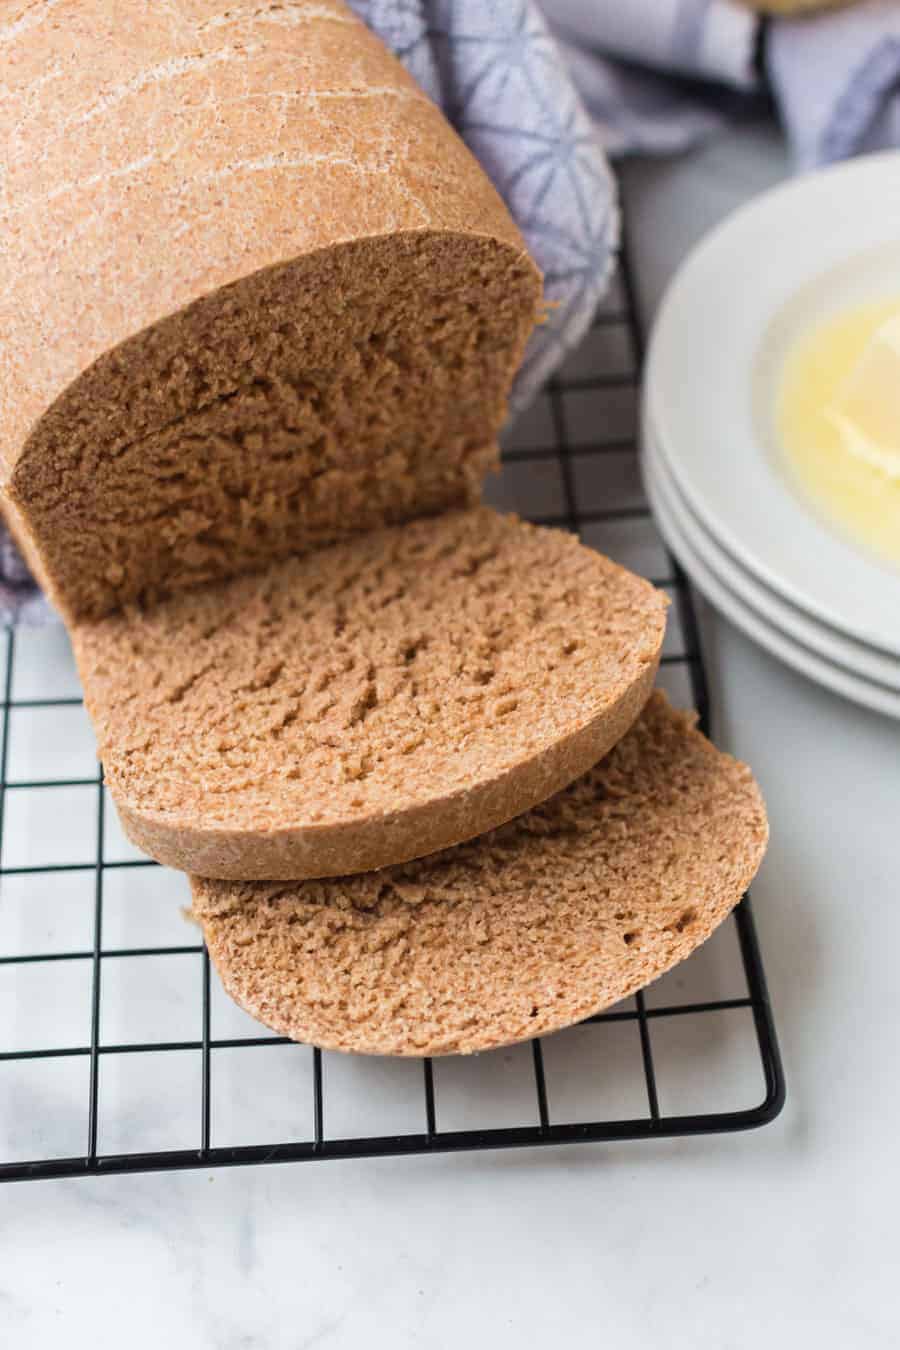 https://www.blessthismessplease.com/wp-content/uploads/2019/08/Whole-Wheat-Bread-13.jpg